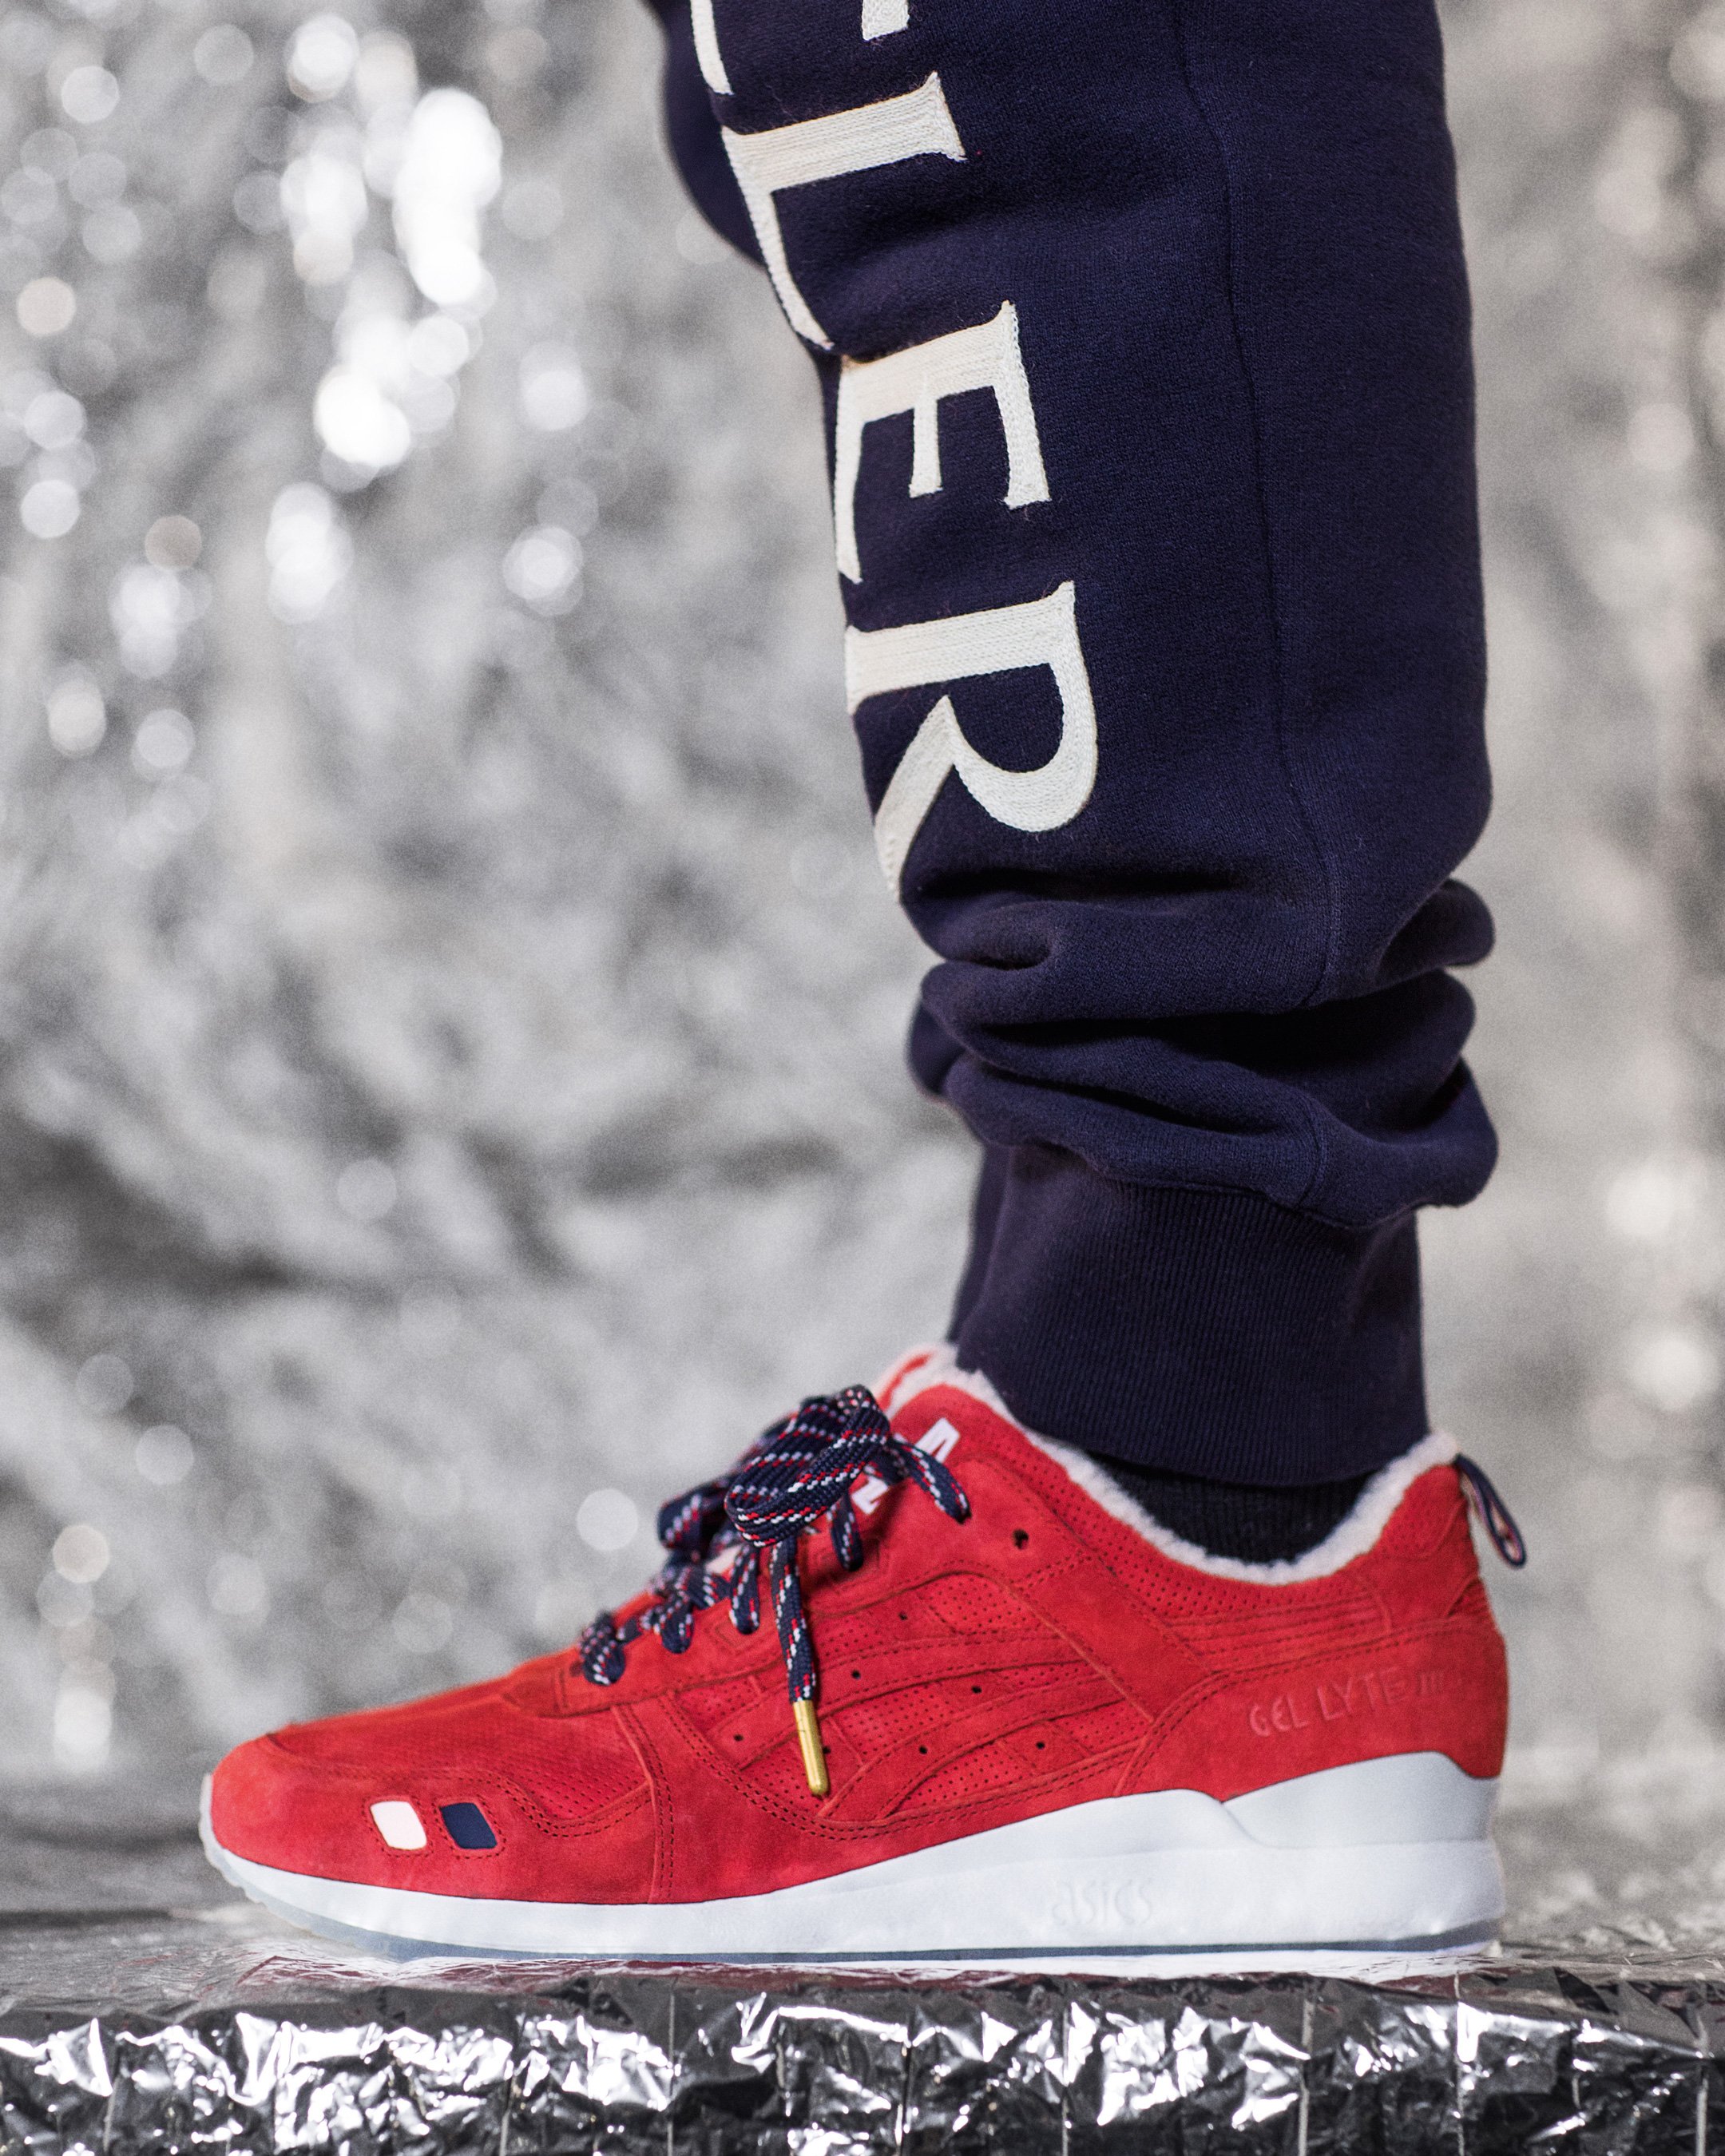 Moncler, Asics, and Kith Link for Winter Footwear and Apparel